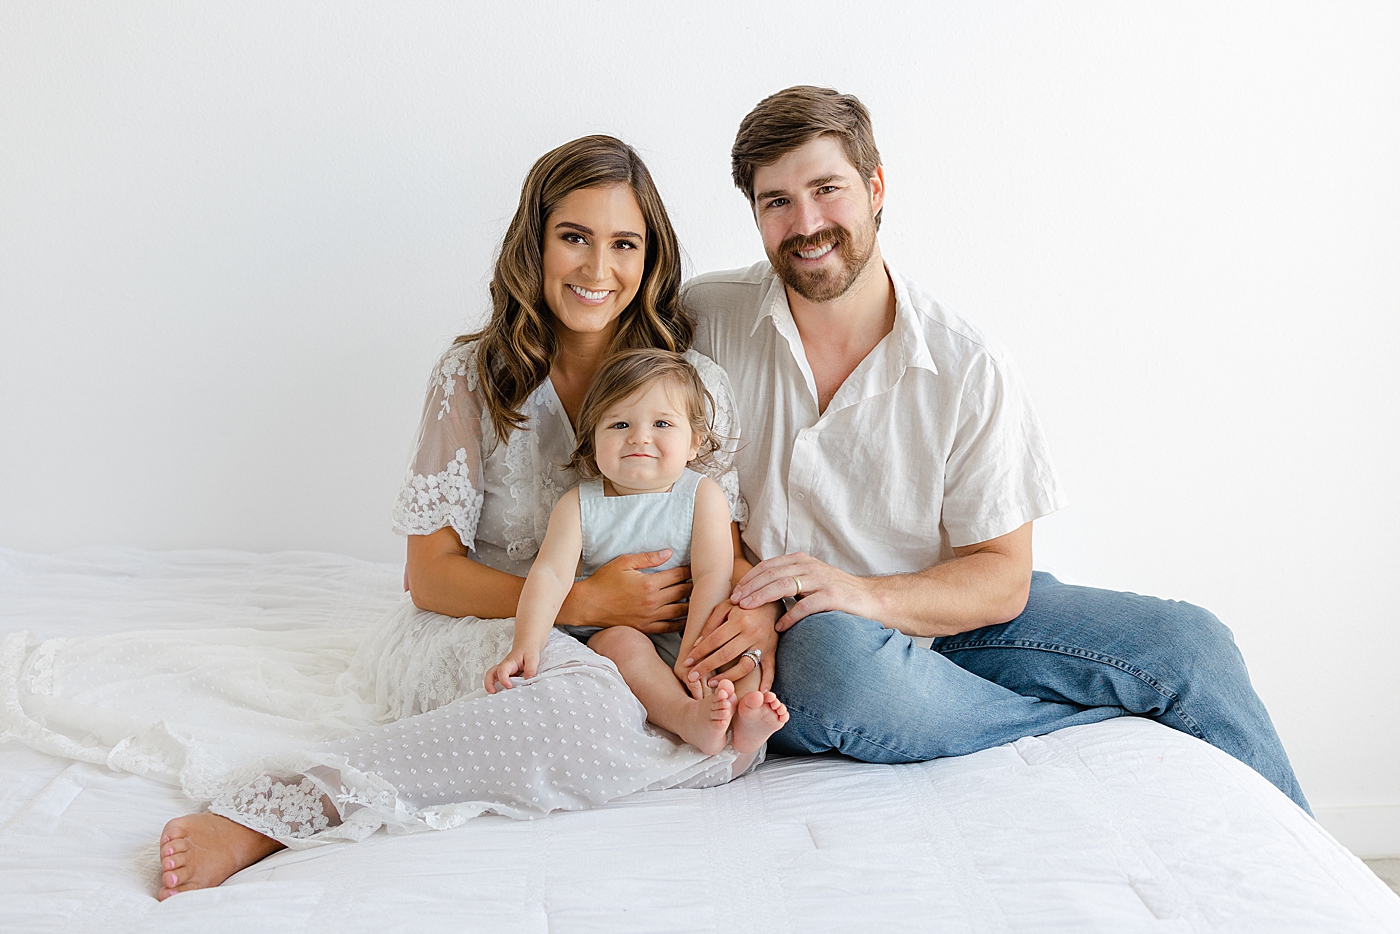 Mom and dad sitting on a bed with their baby during their Studio Family Session | Photo by Sana Ahmed Photography